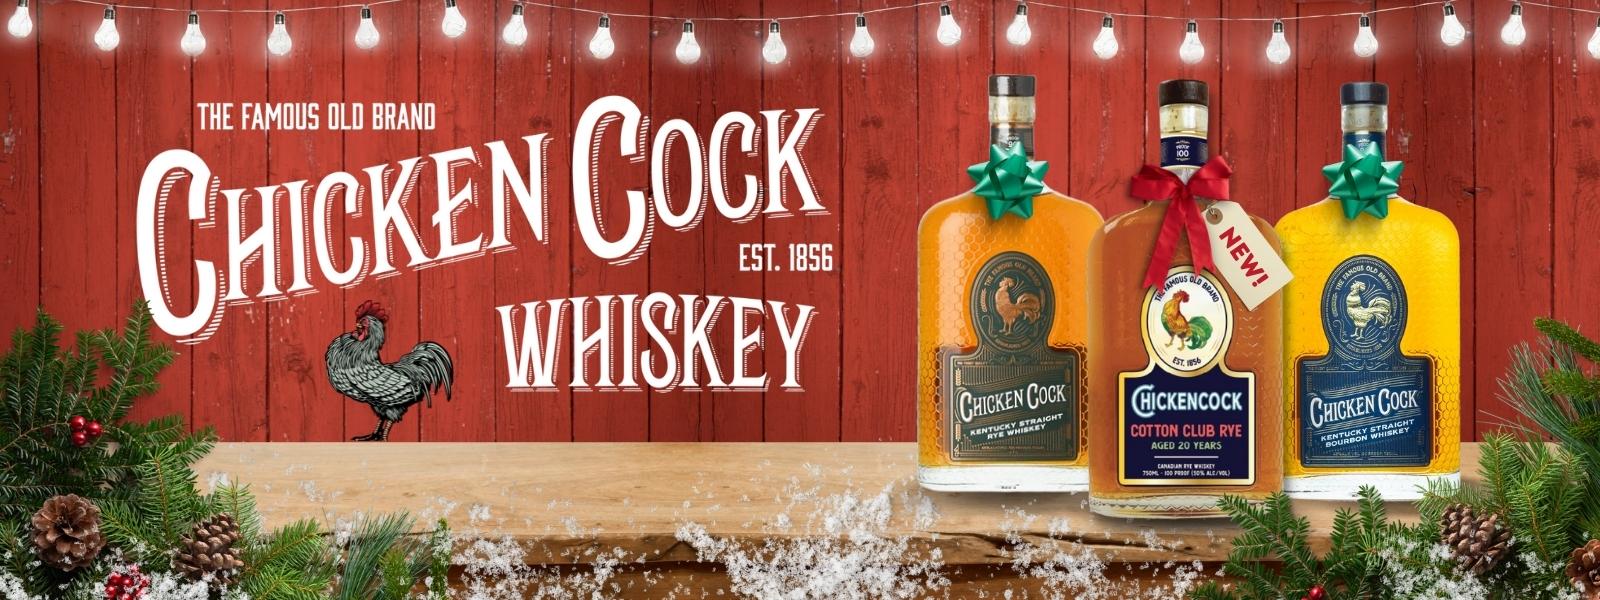 Buy Chicken Cock Cotton Club Canadian Rye Whiskey Online at CaskCartel.com